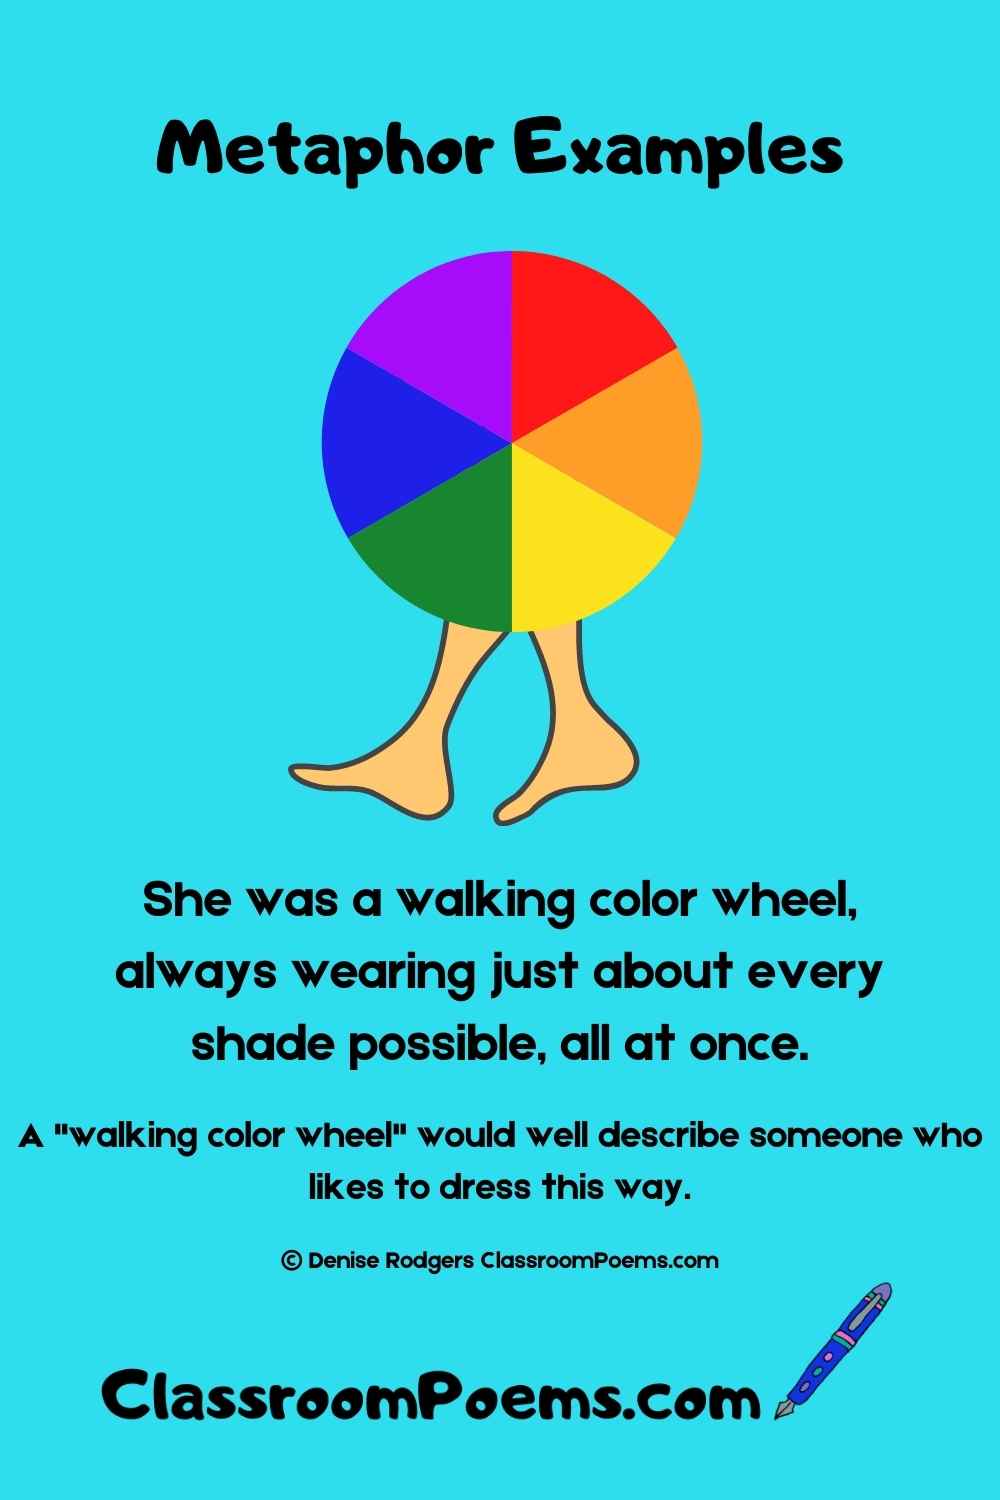 Color wheel metaphor example by Denise Rodgers  on ClassroomPoems.com